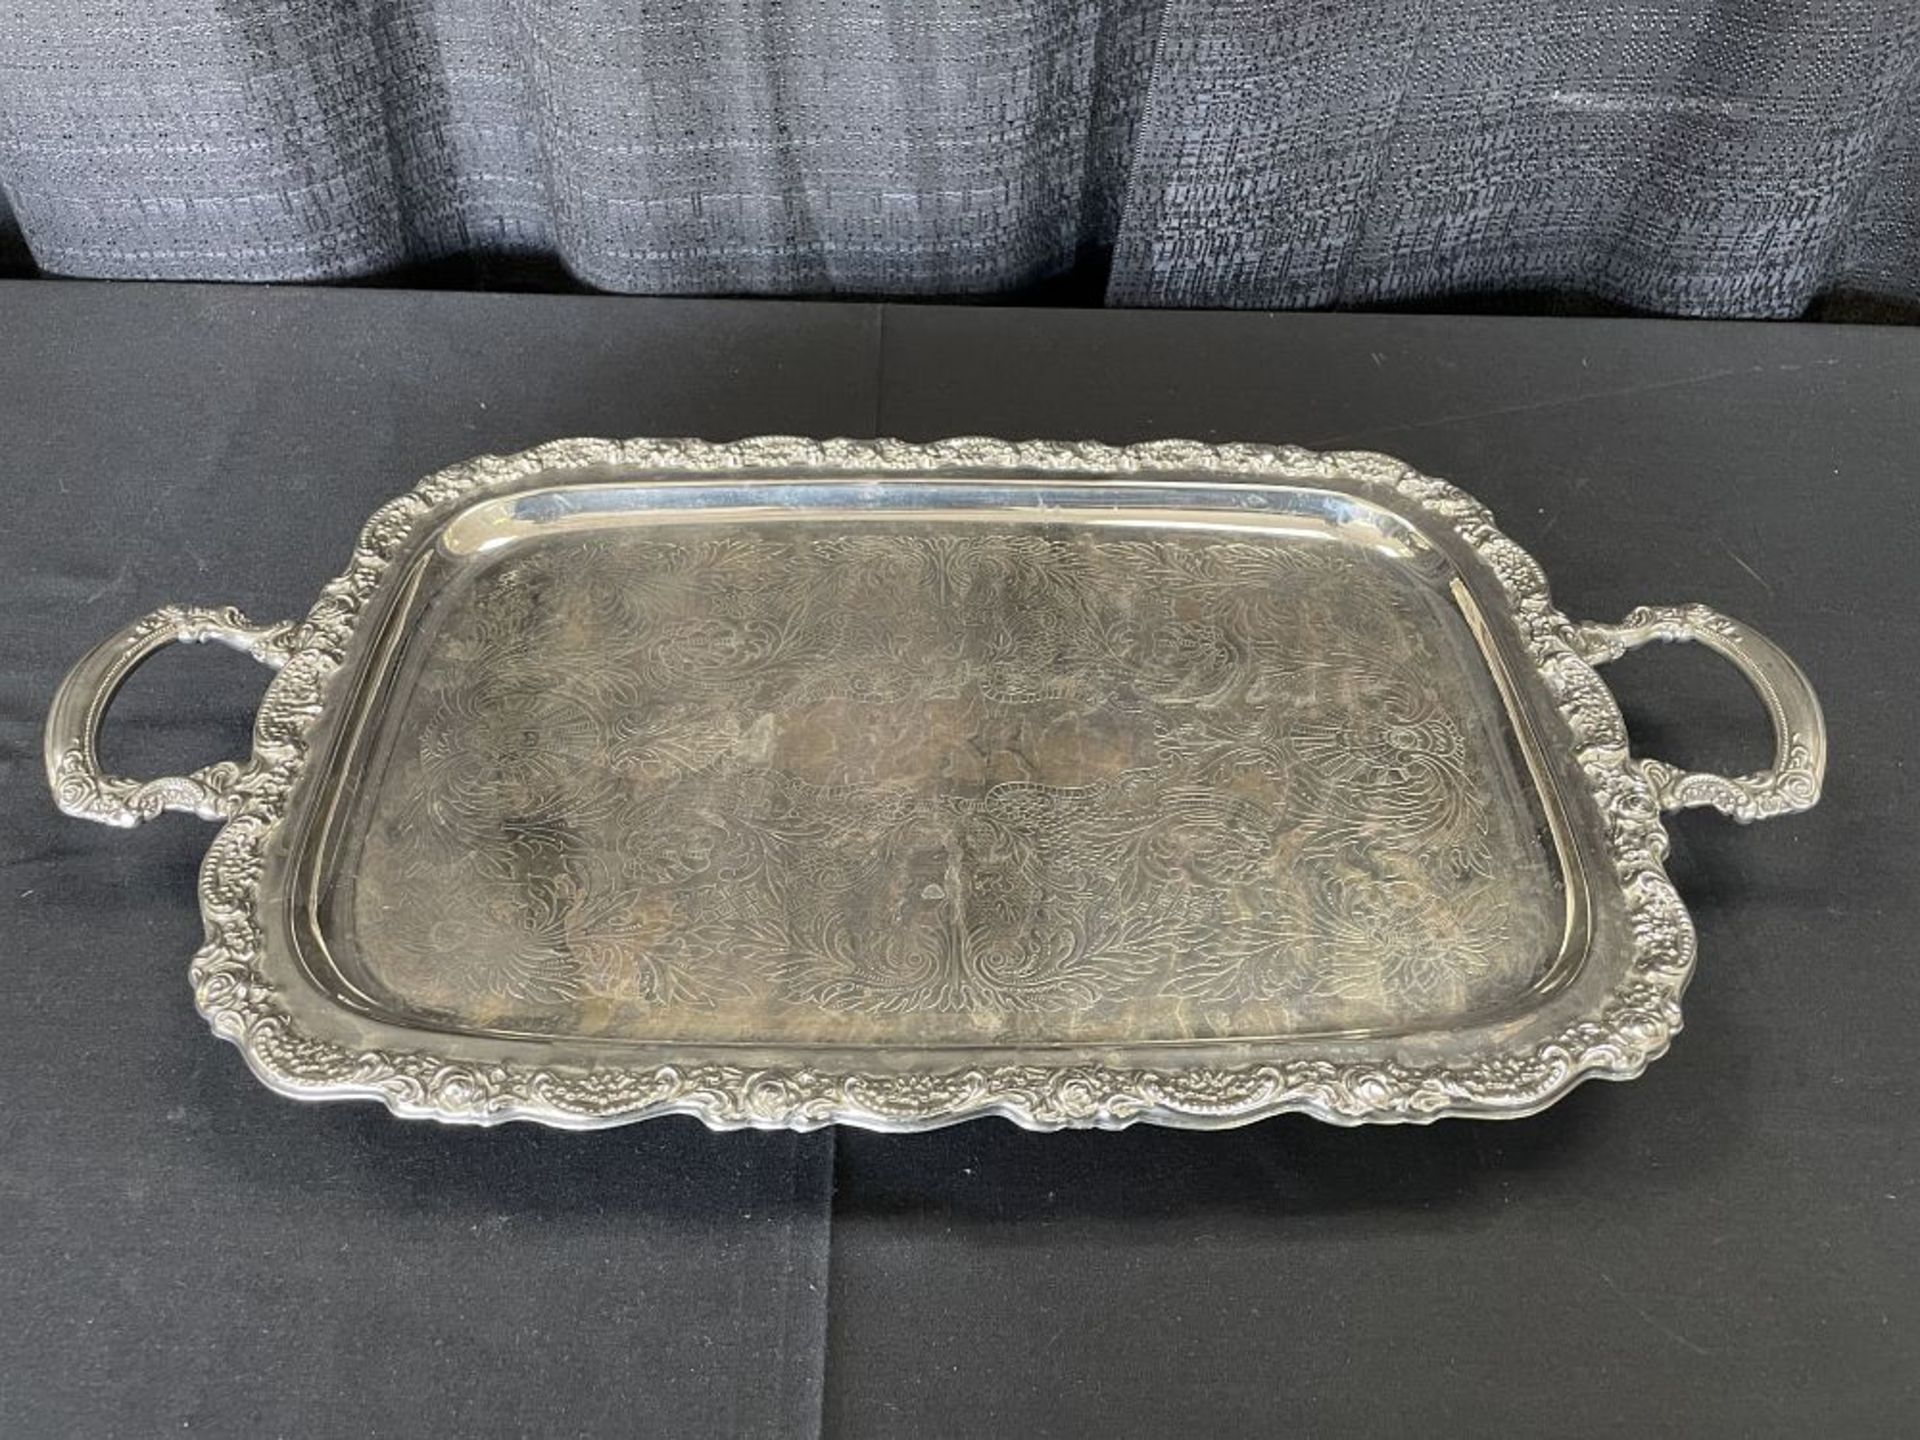 13.5" x 19.5" Handled Silver Plate Serving Tray